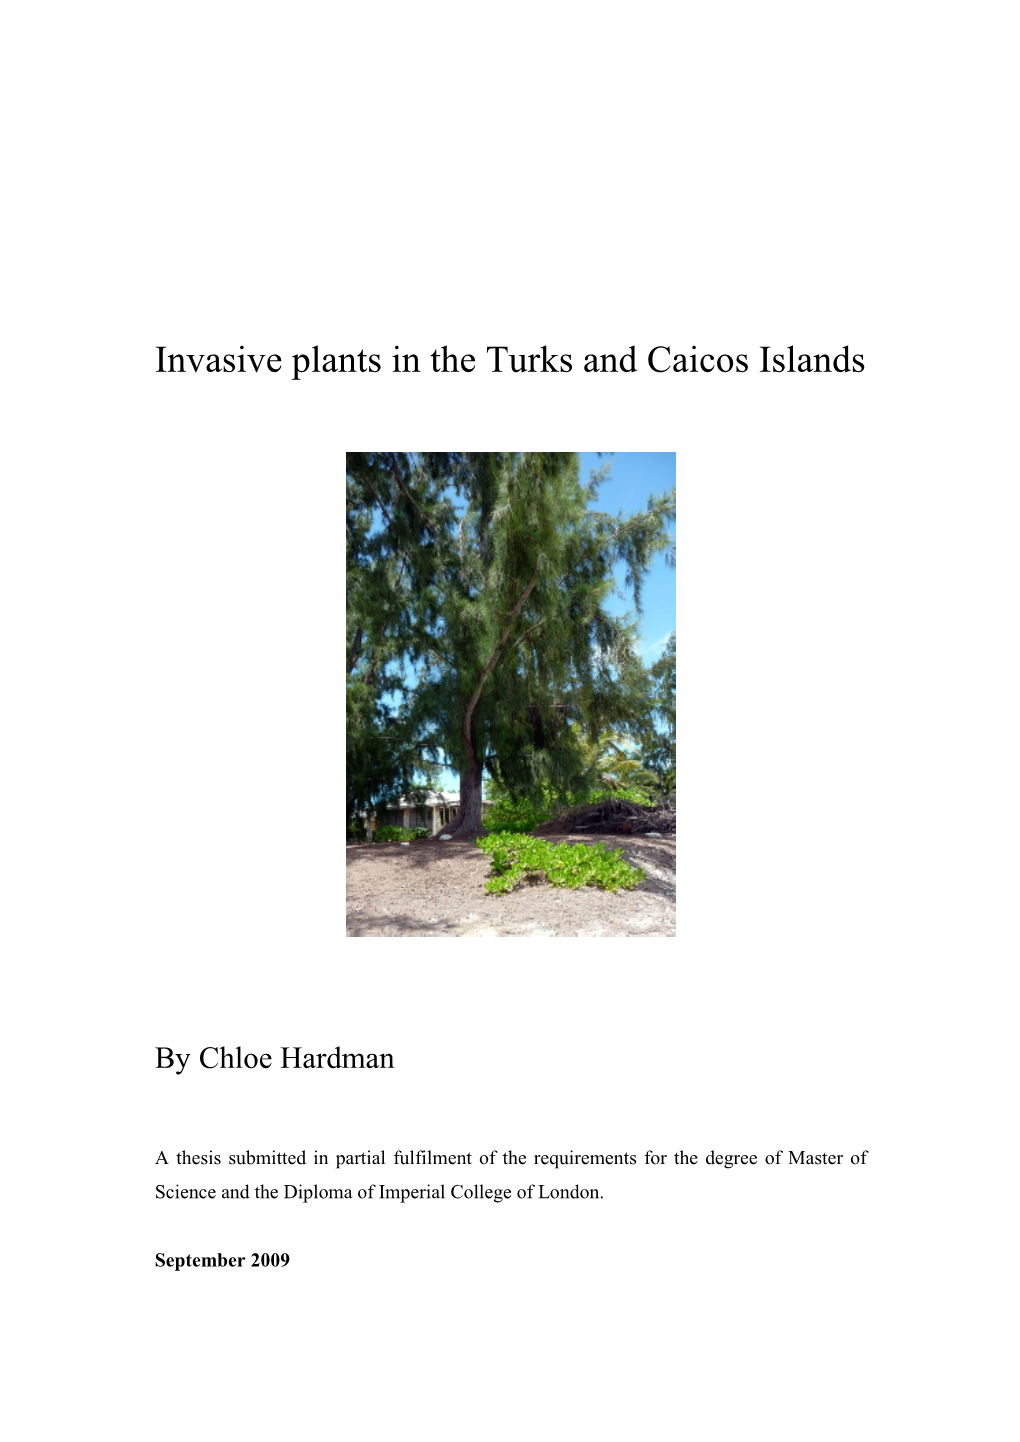 Invasive Plants in the Turks and Caicos Islands